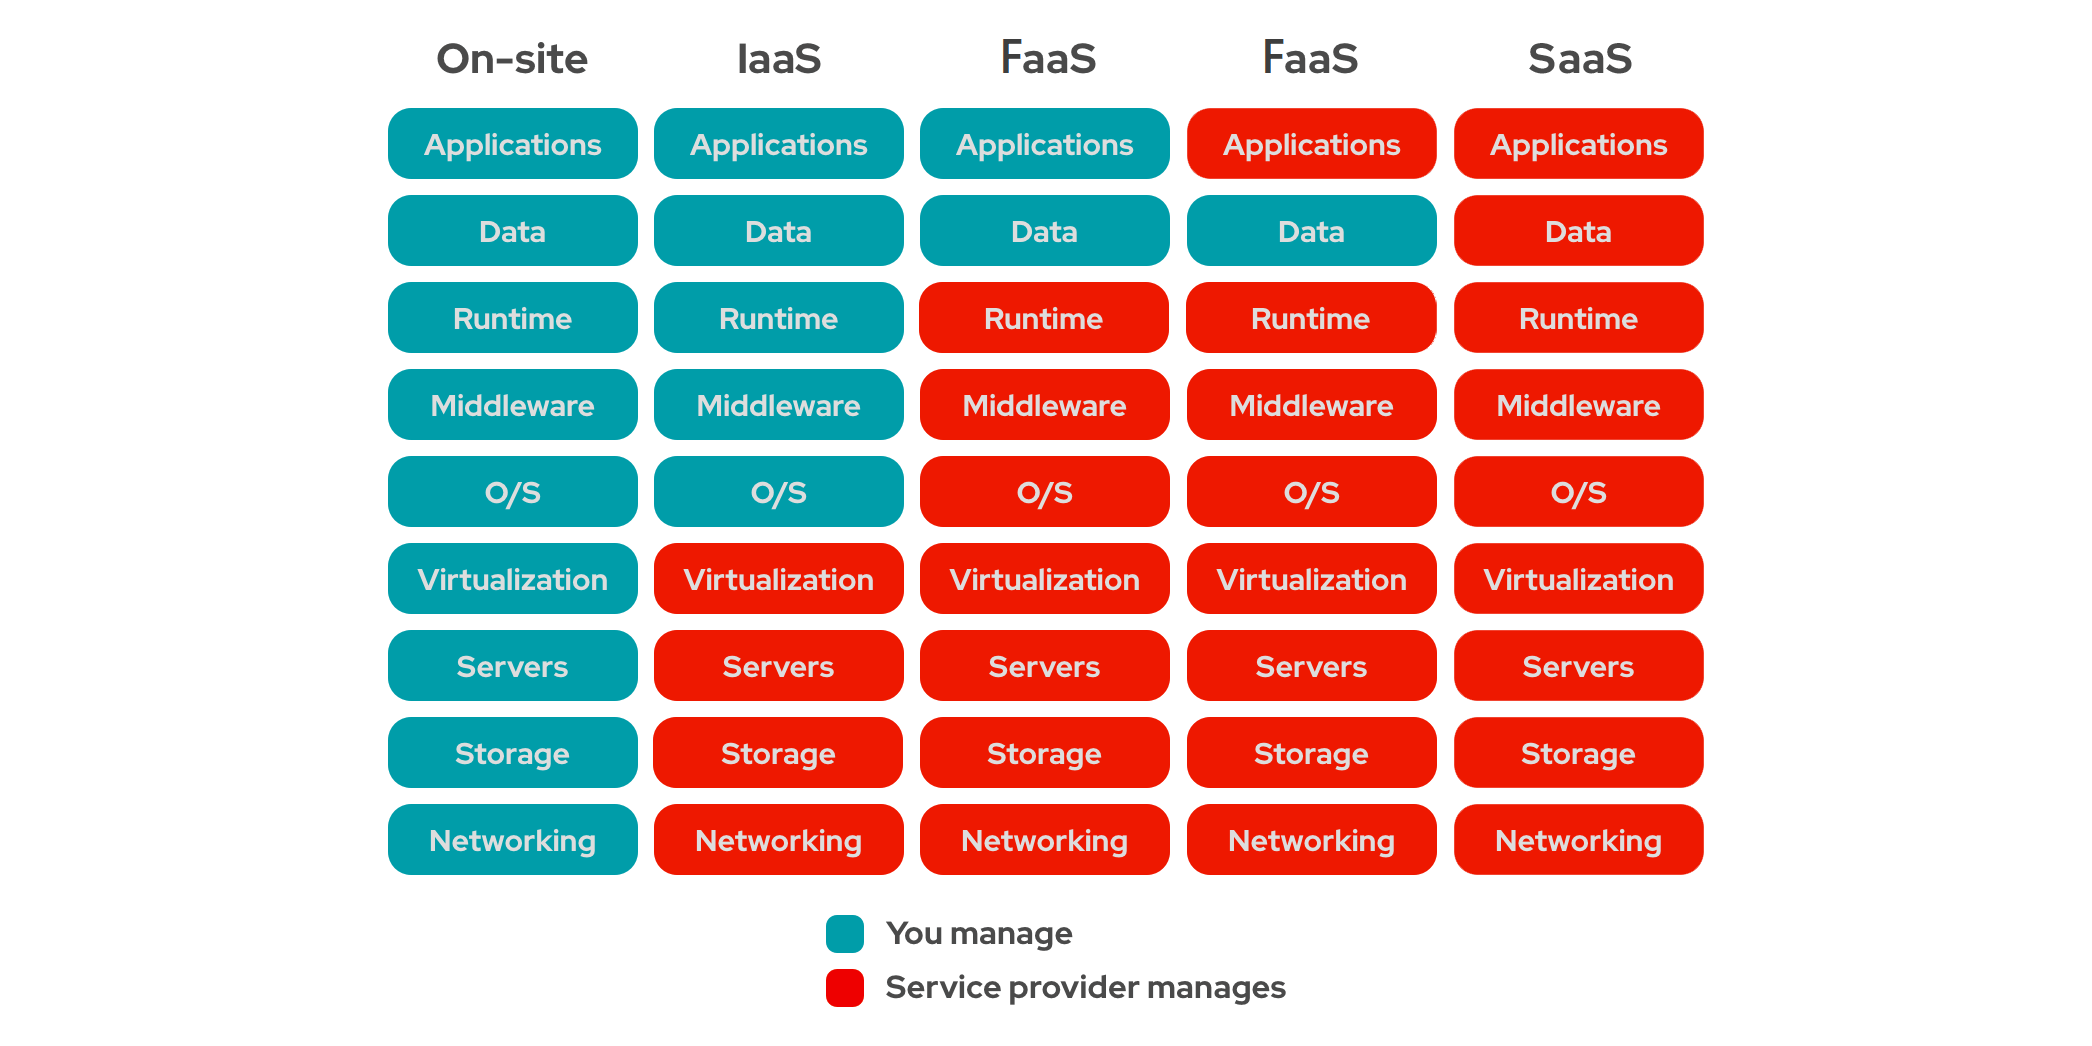 What Are Cloud IAAS, PAAS, SAAS, FAAS, And Why We Use Them